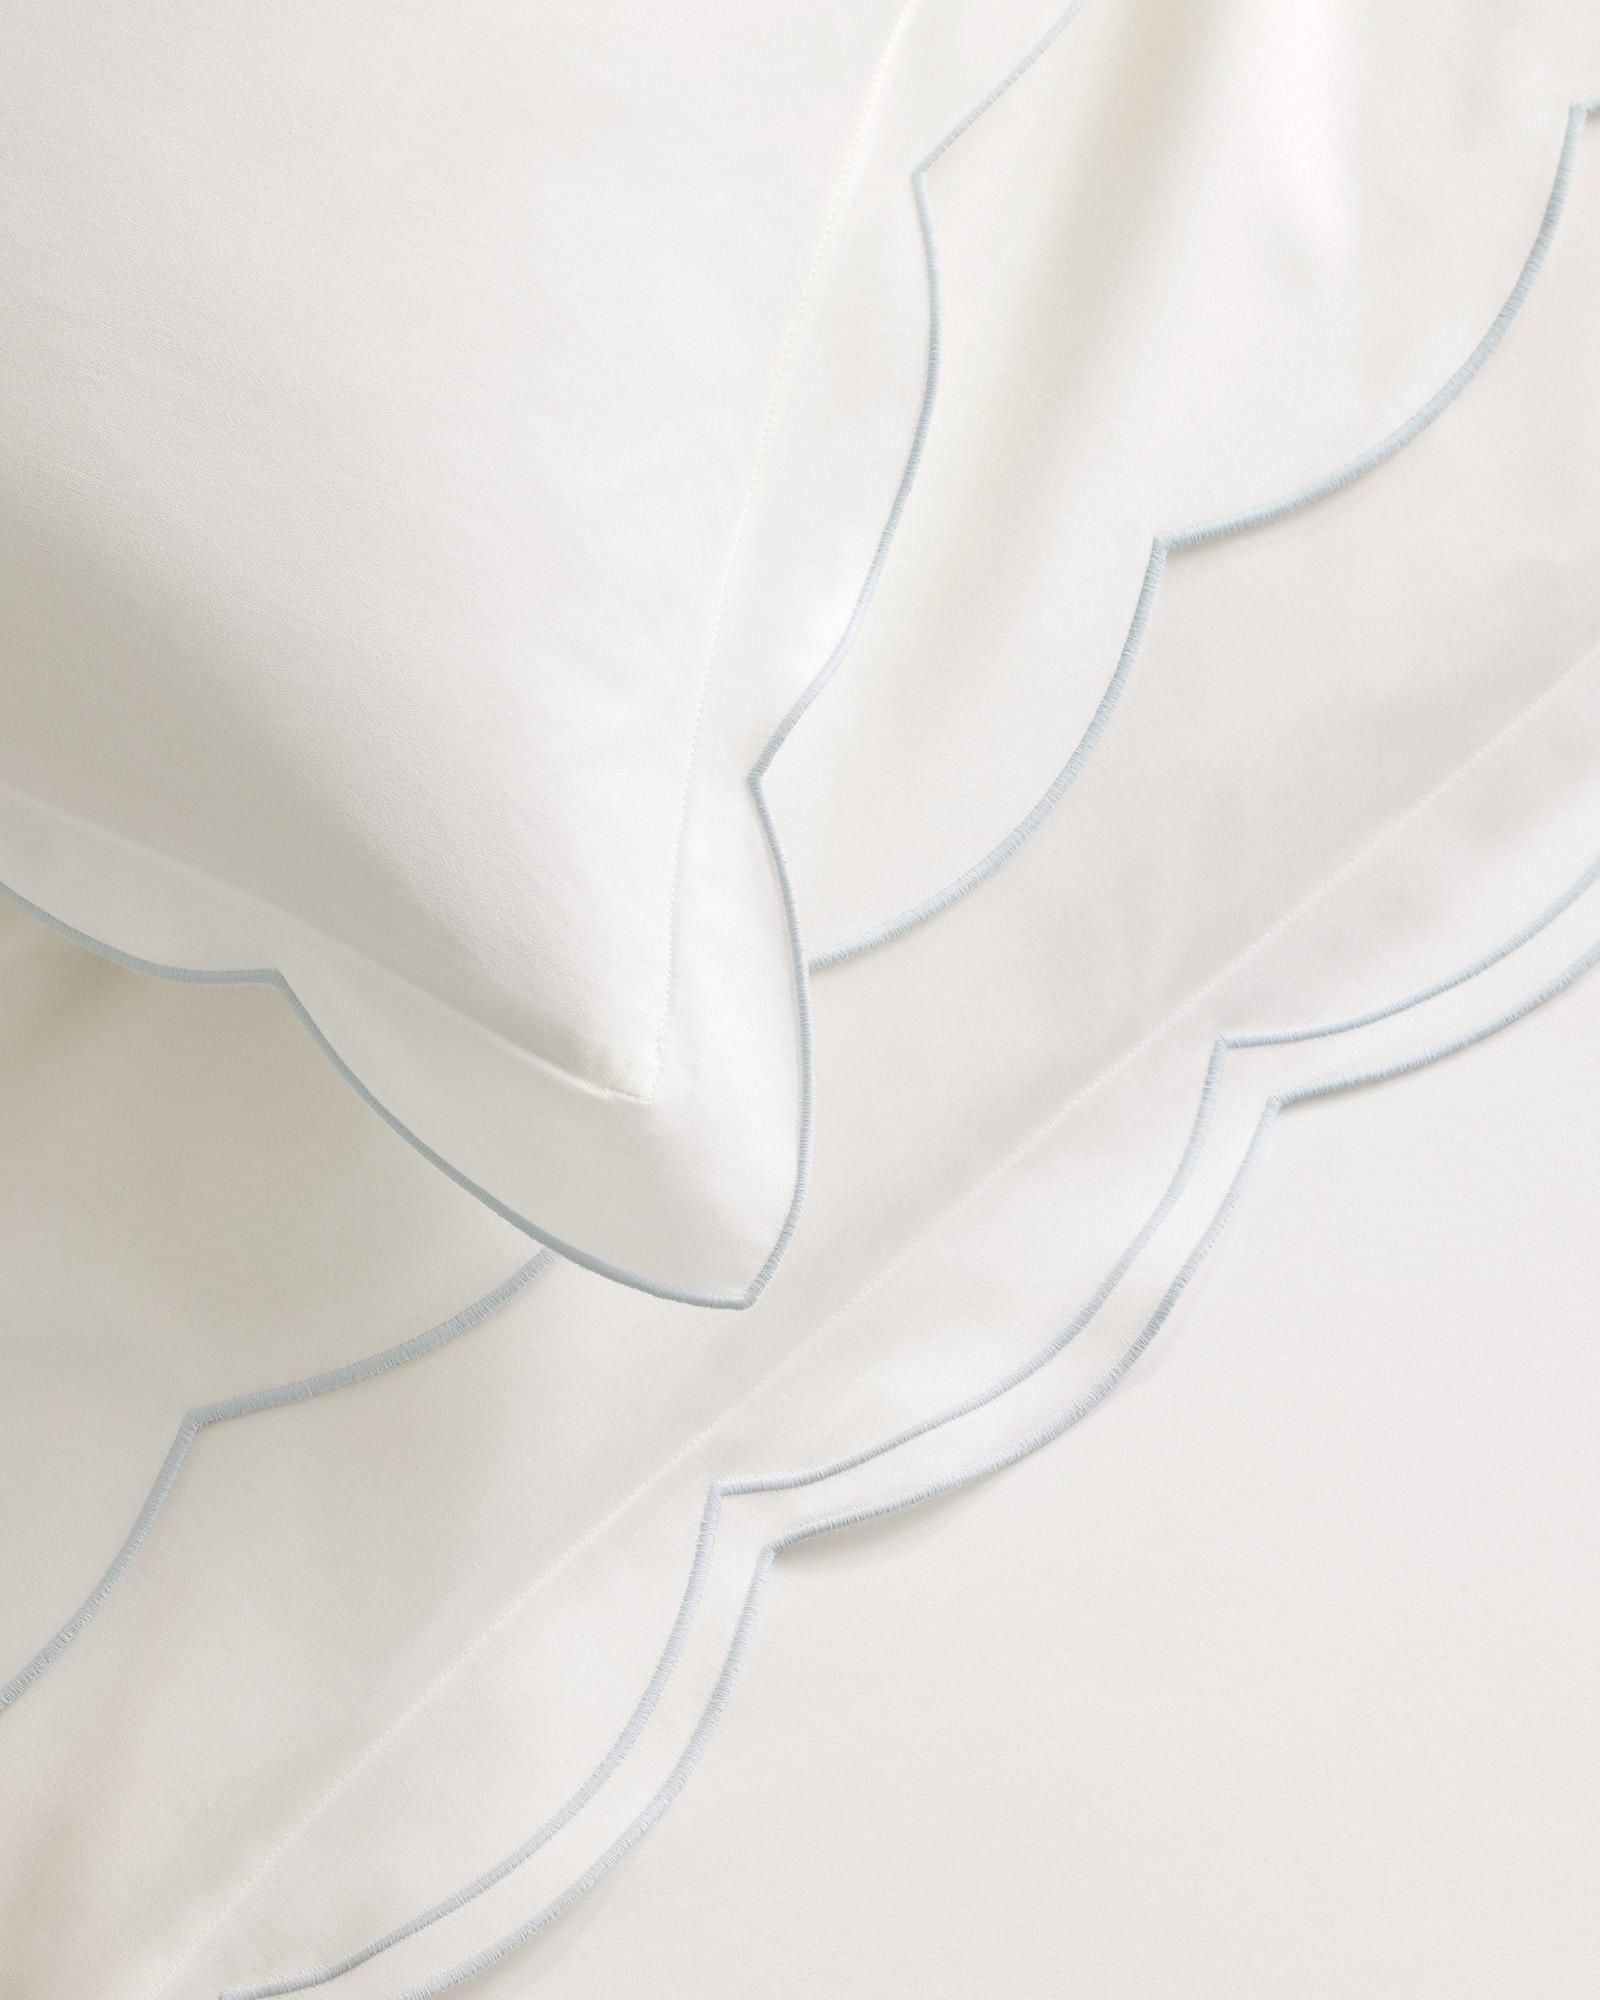 Scallop Sateen Bedding Set | Serena and Lily